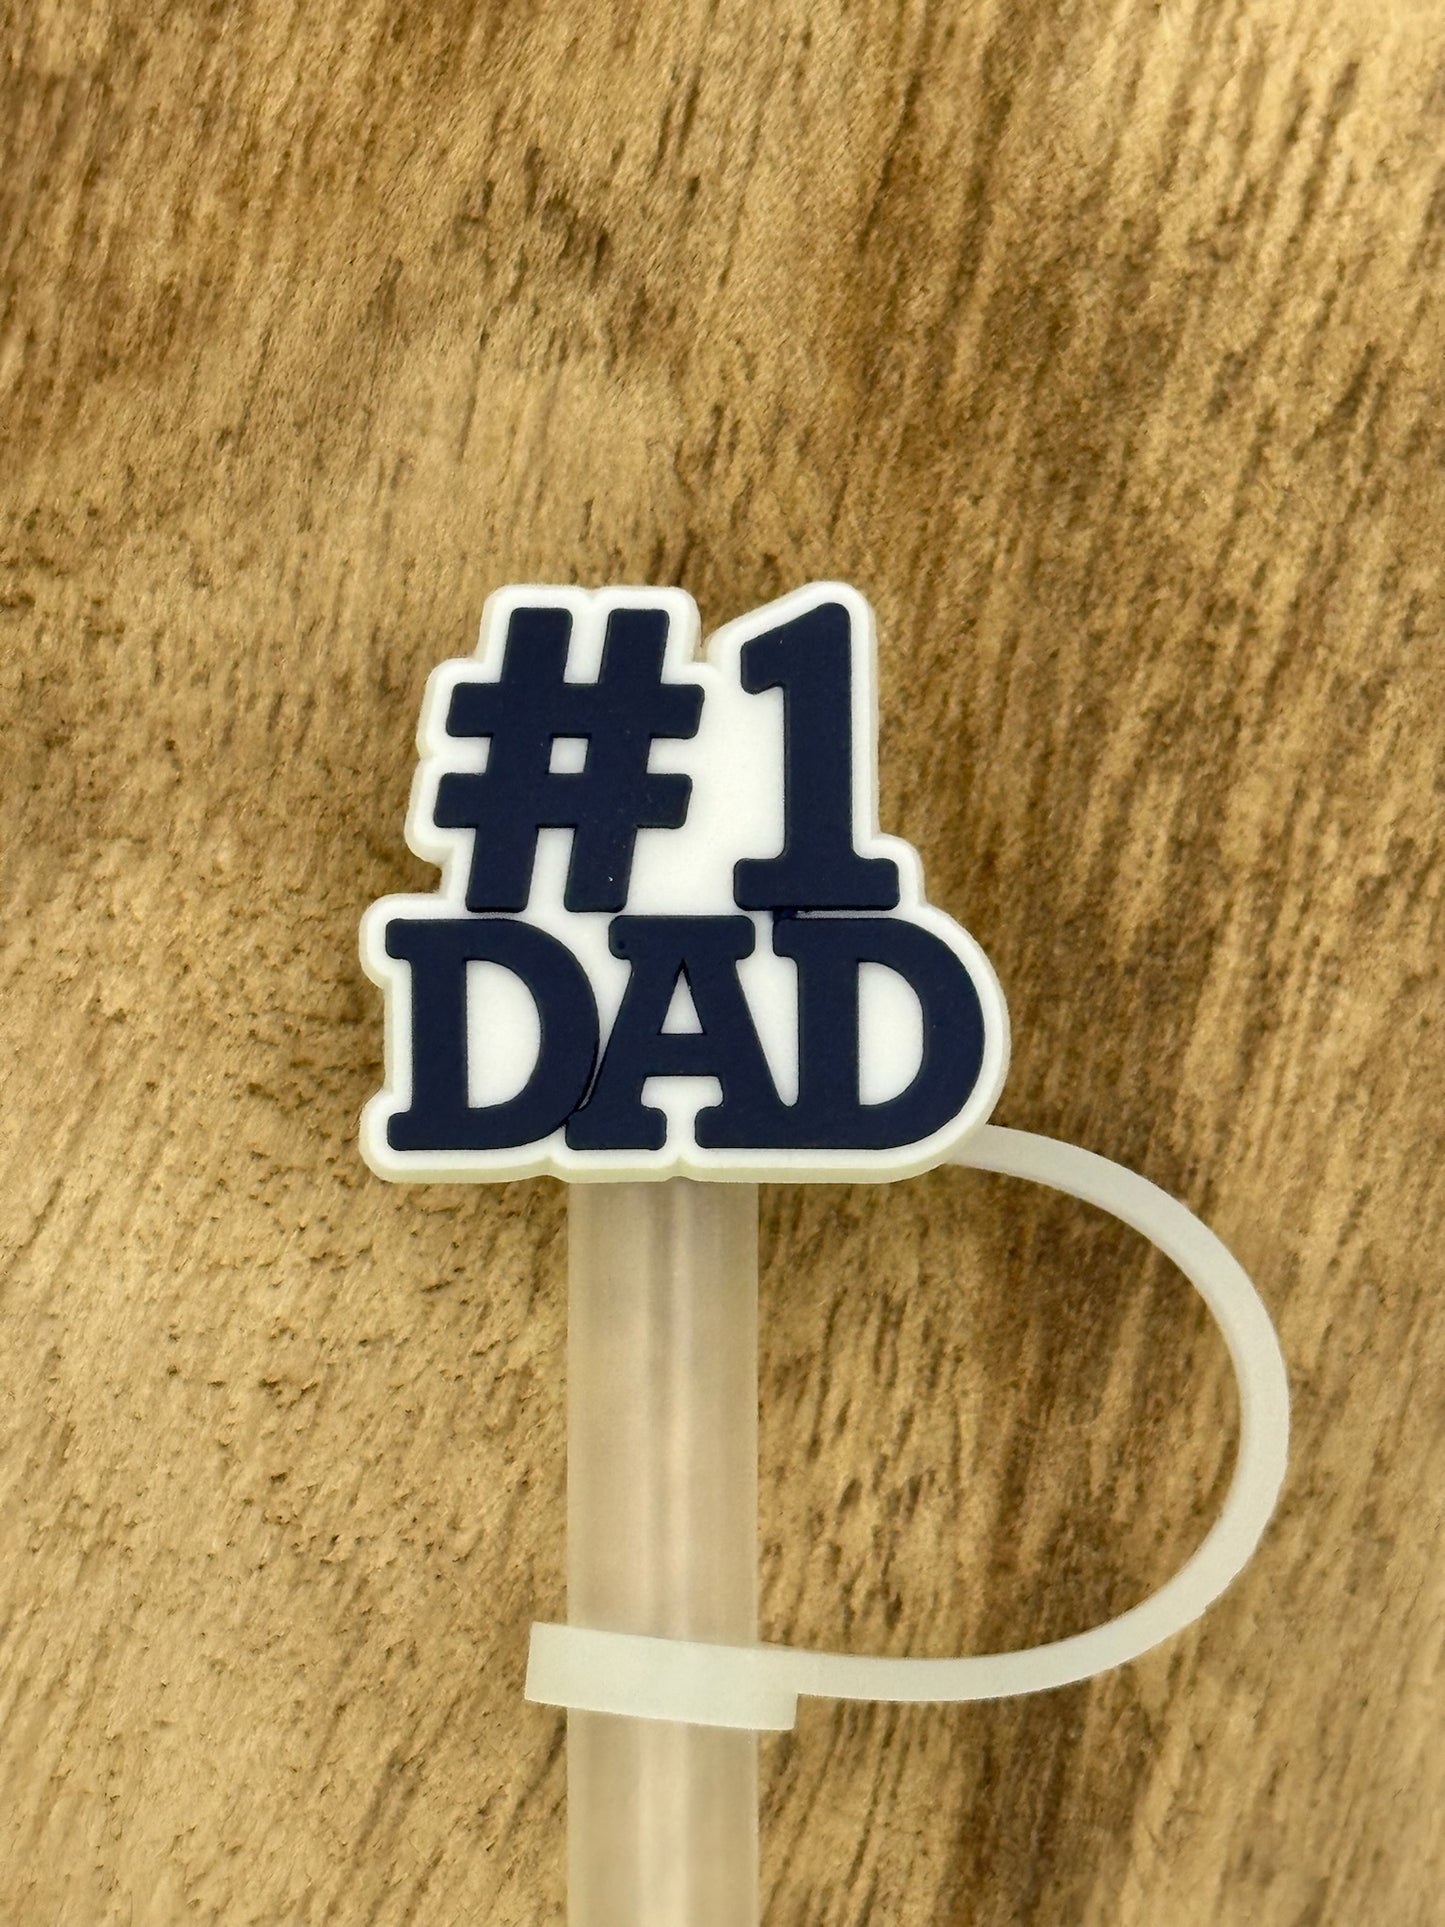 Celebrate Dads Straw Toppers | Top Dad | #1 Dad | Fathers Day Gift|